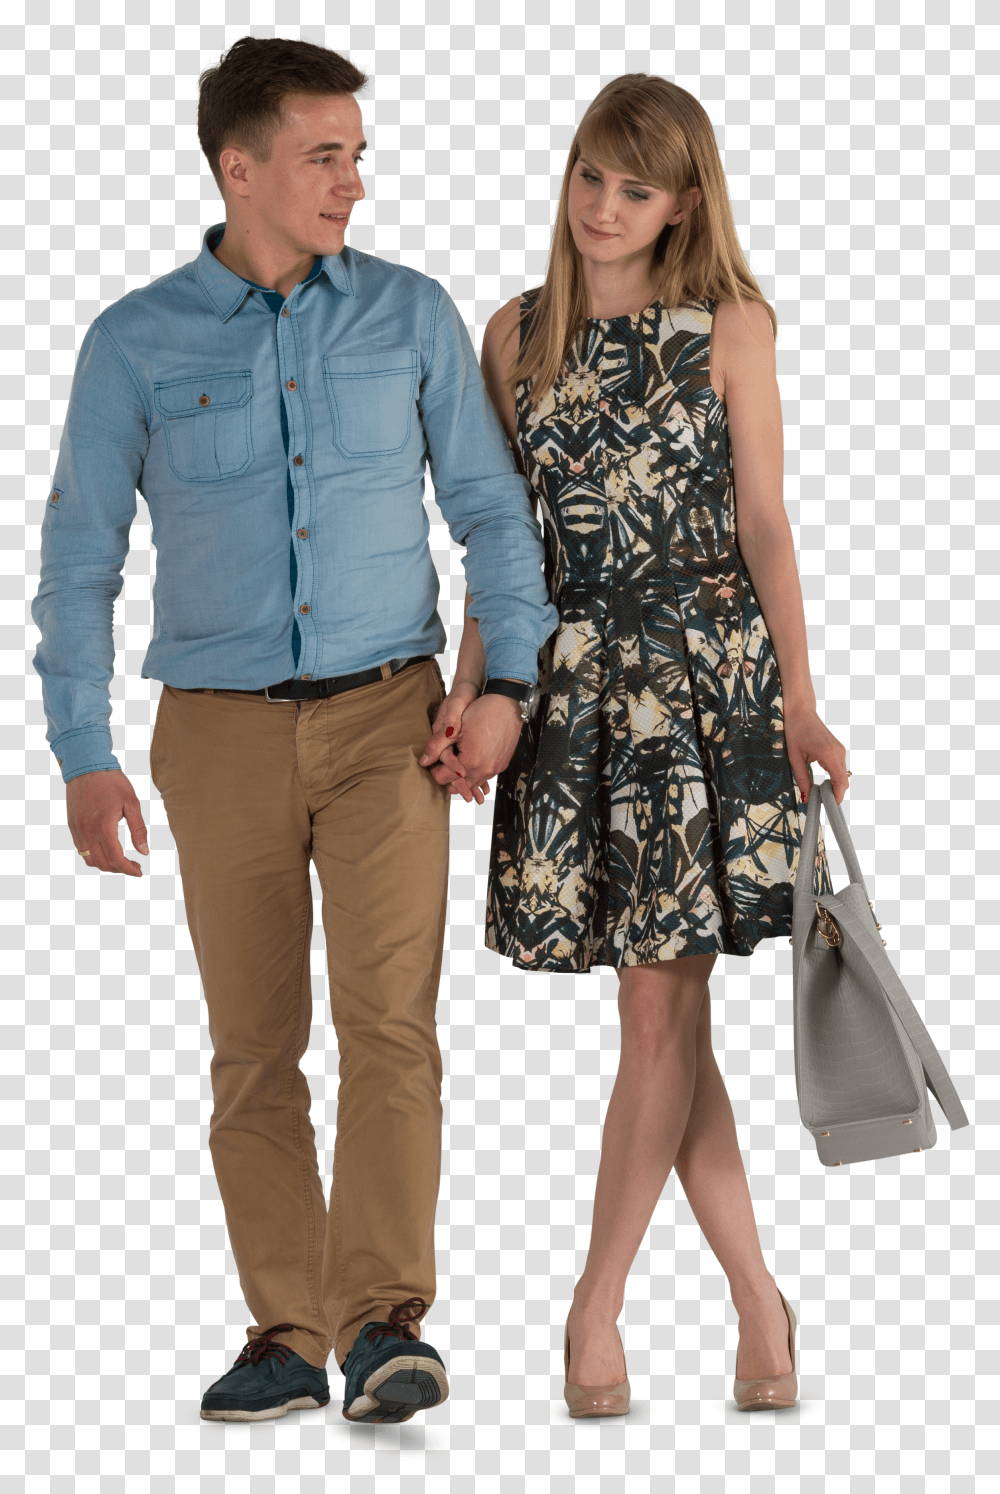 Cut Out People Free Cutout People Photos Couple Human Cut Out Transparent Png